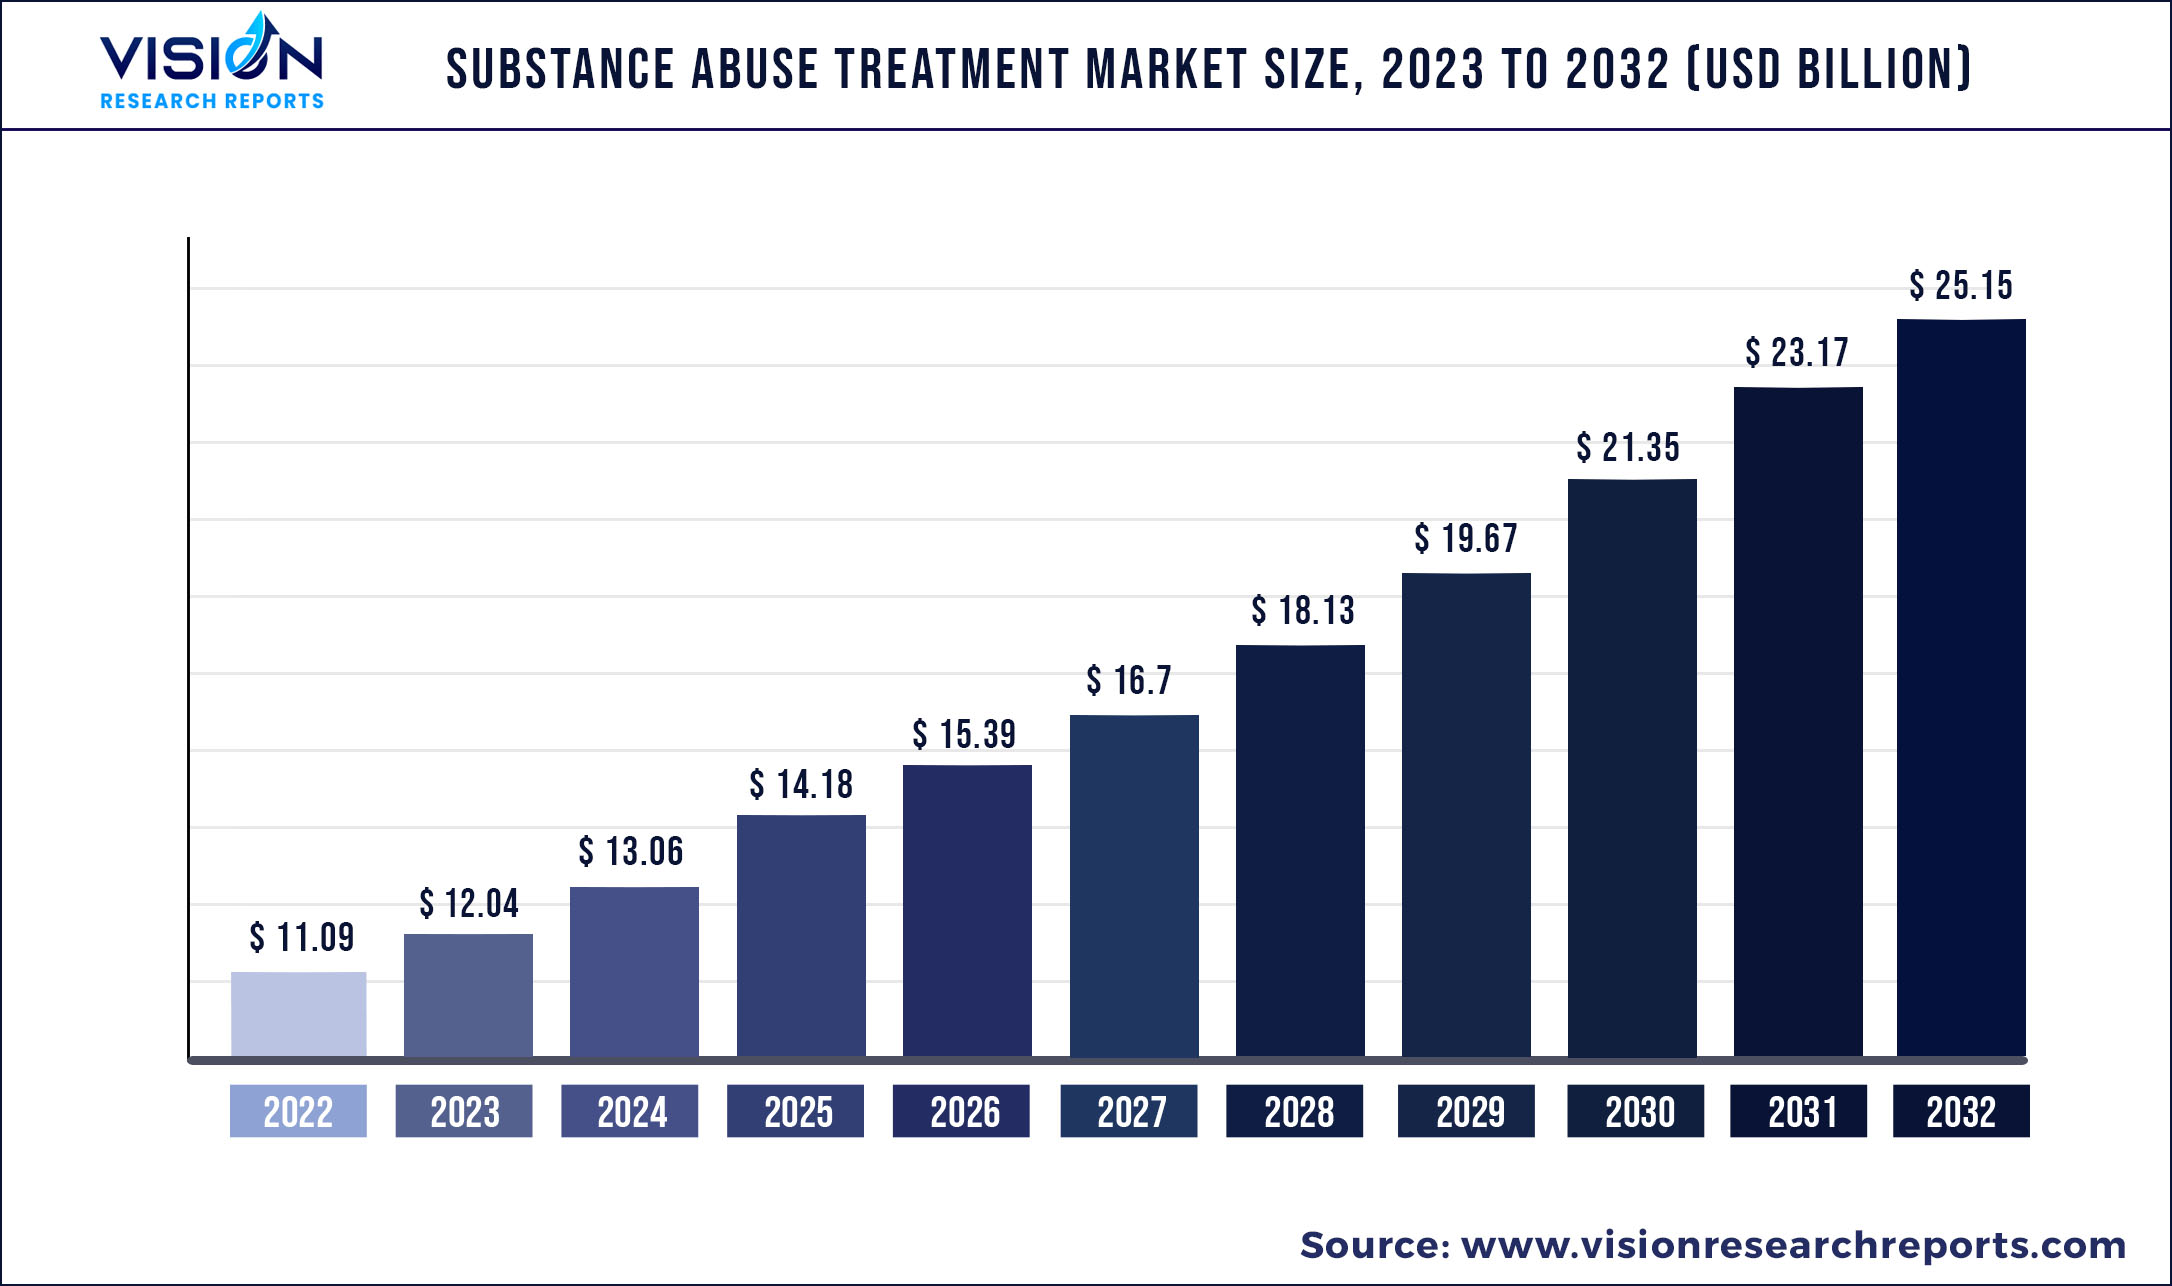 Substance Abuse Treatment Market Size 2023 to 2032